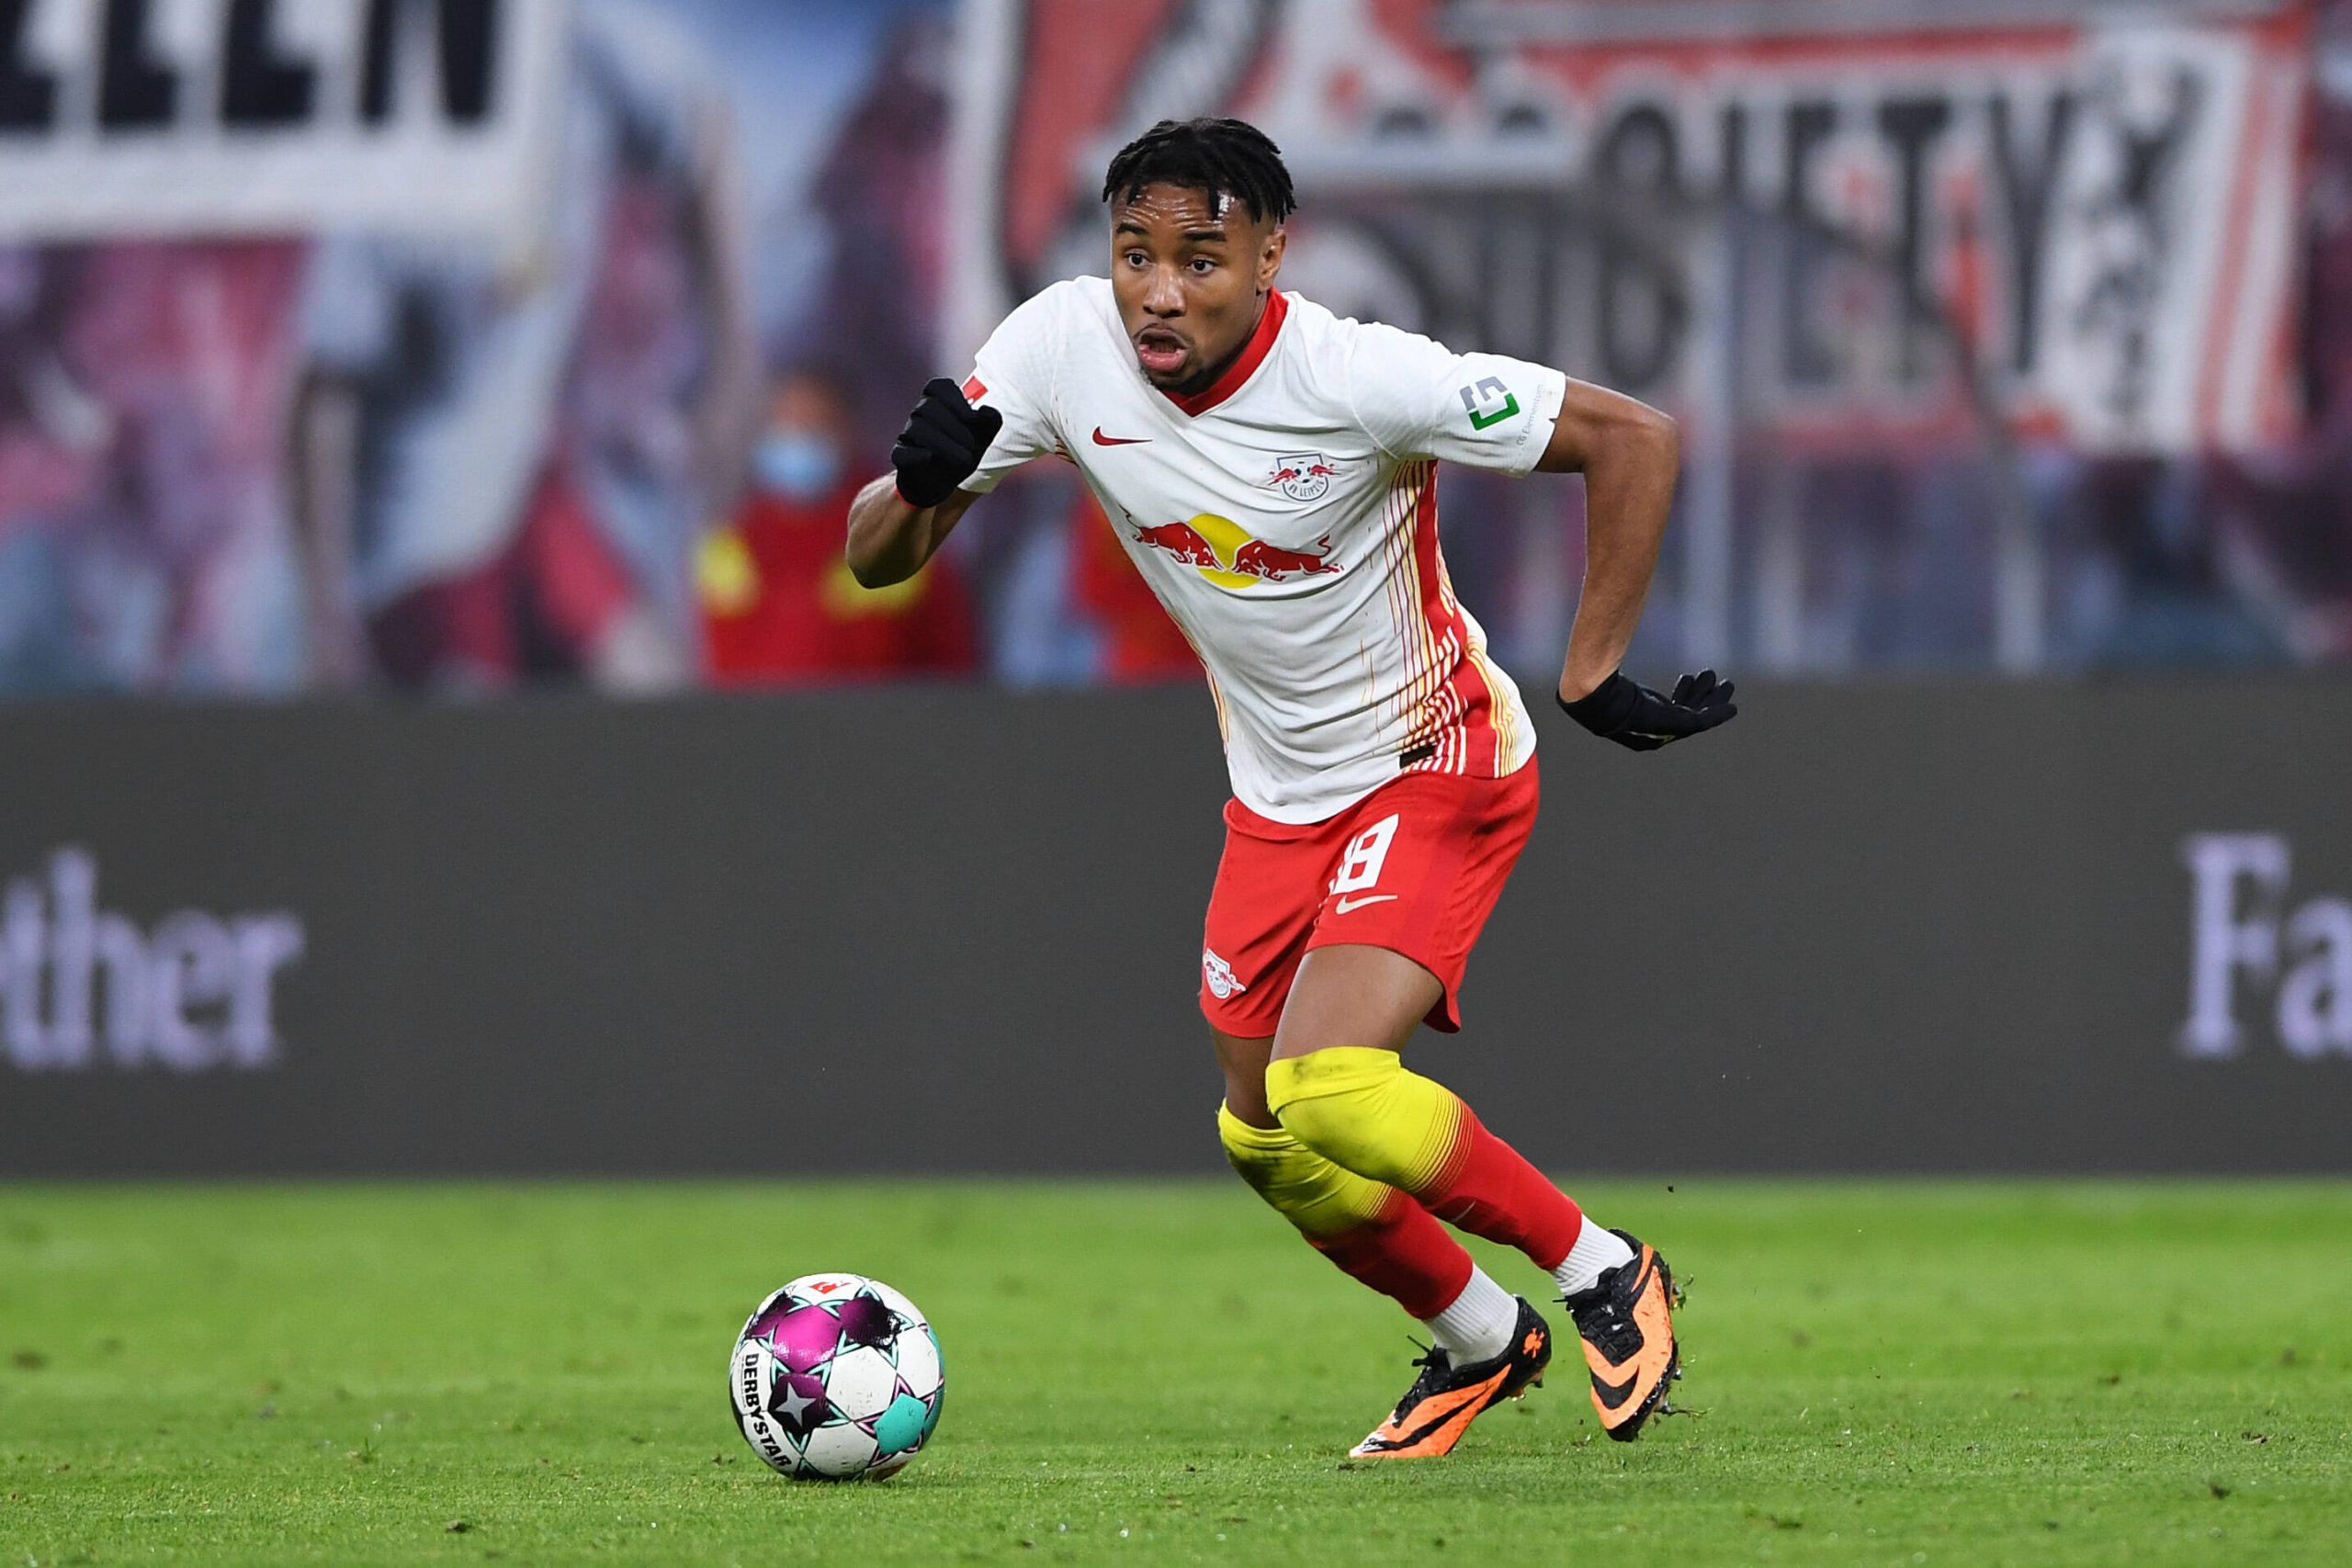 Christopher Nkunku, 24, is reportedly close to signing a new contract with RB Leipzig